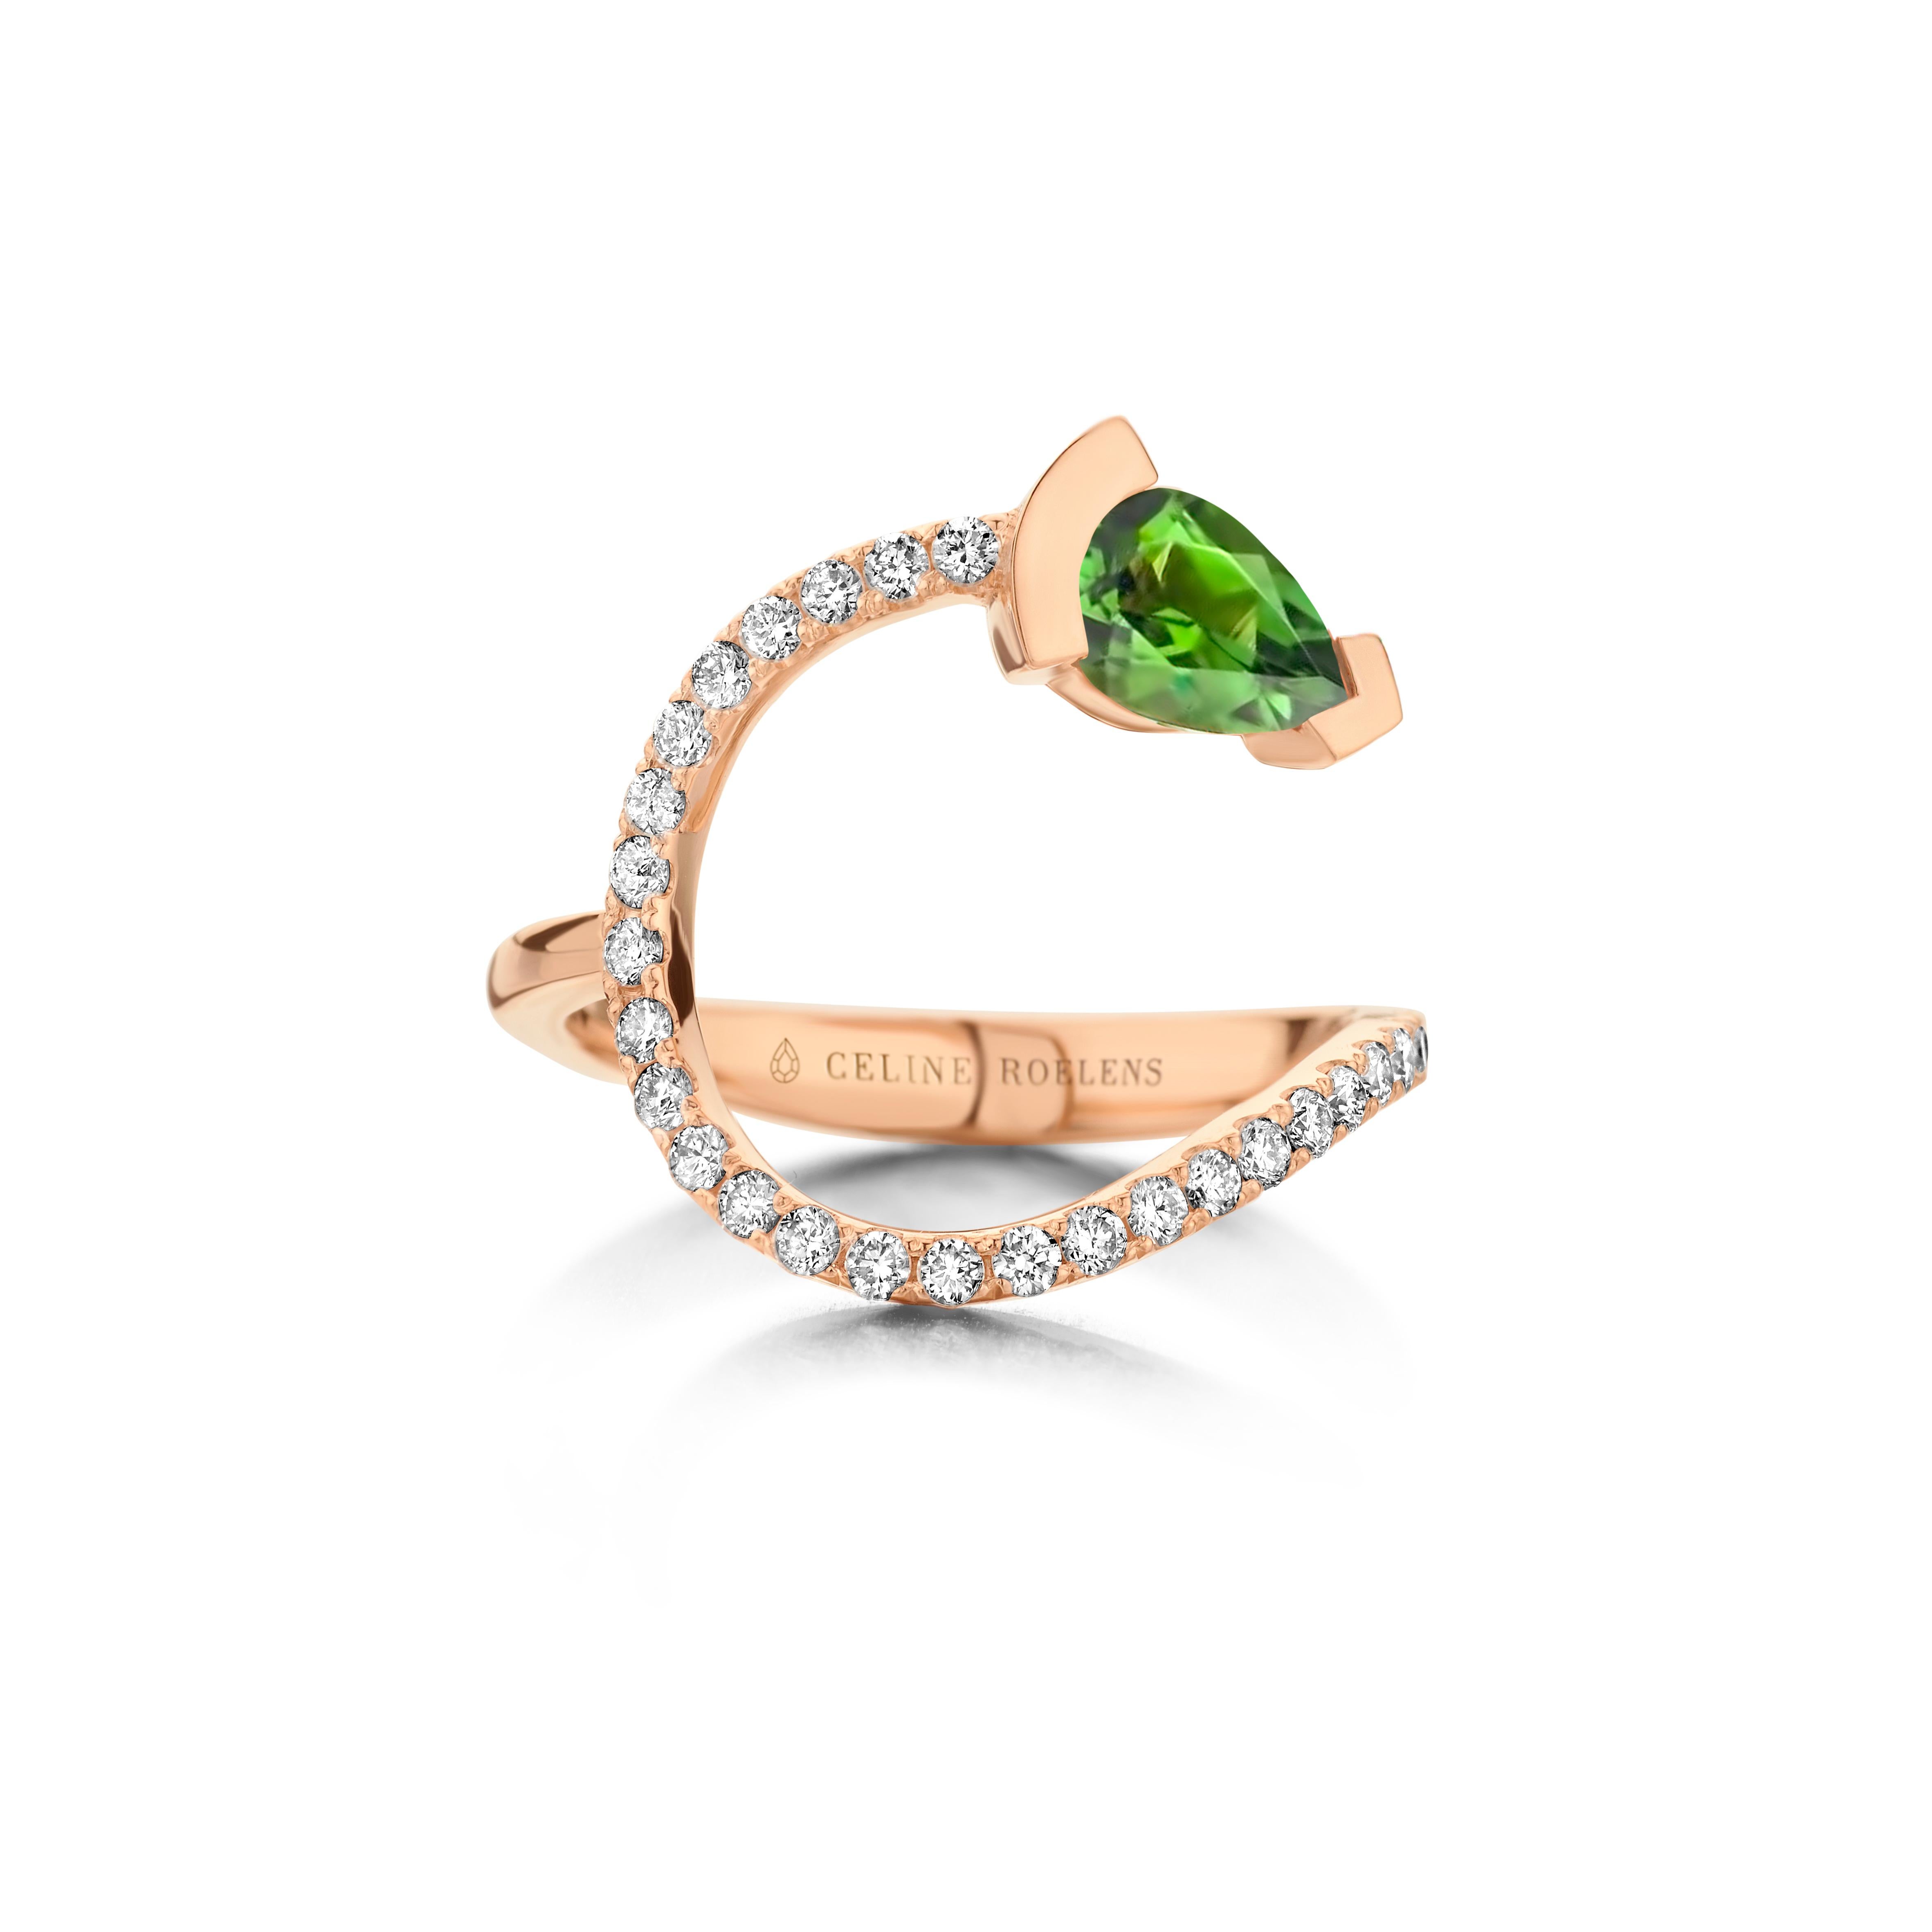 ADELINE curved ring in 18Kt white gold set with a pear shaped Green tourmaline and 0,33 Ct of white brilliant cut diamonds - VS F quality.